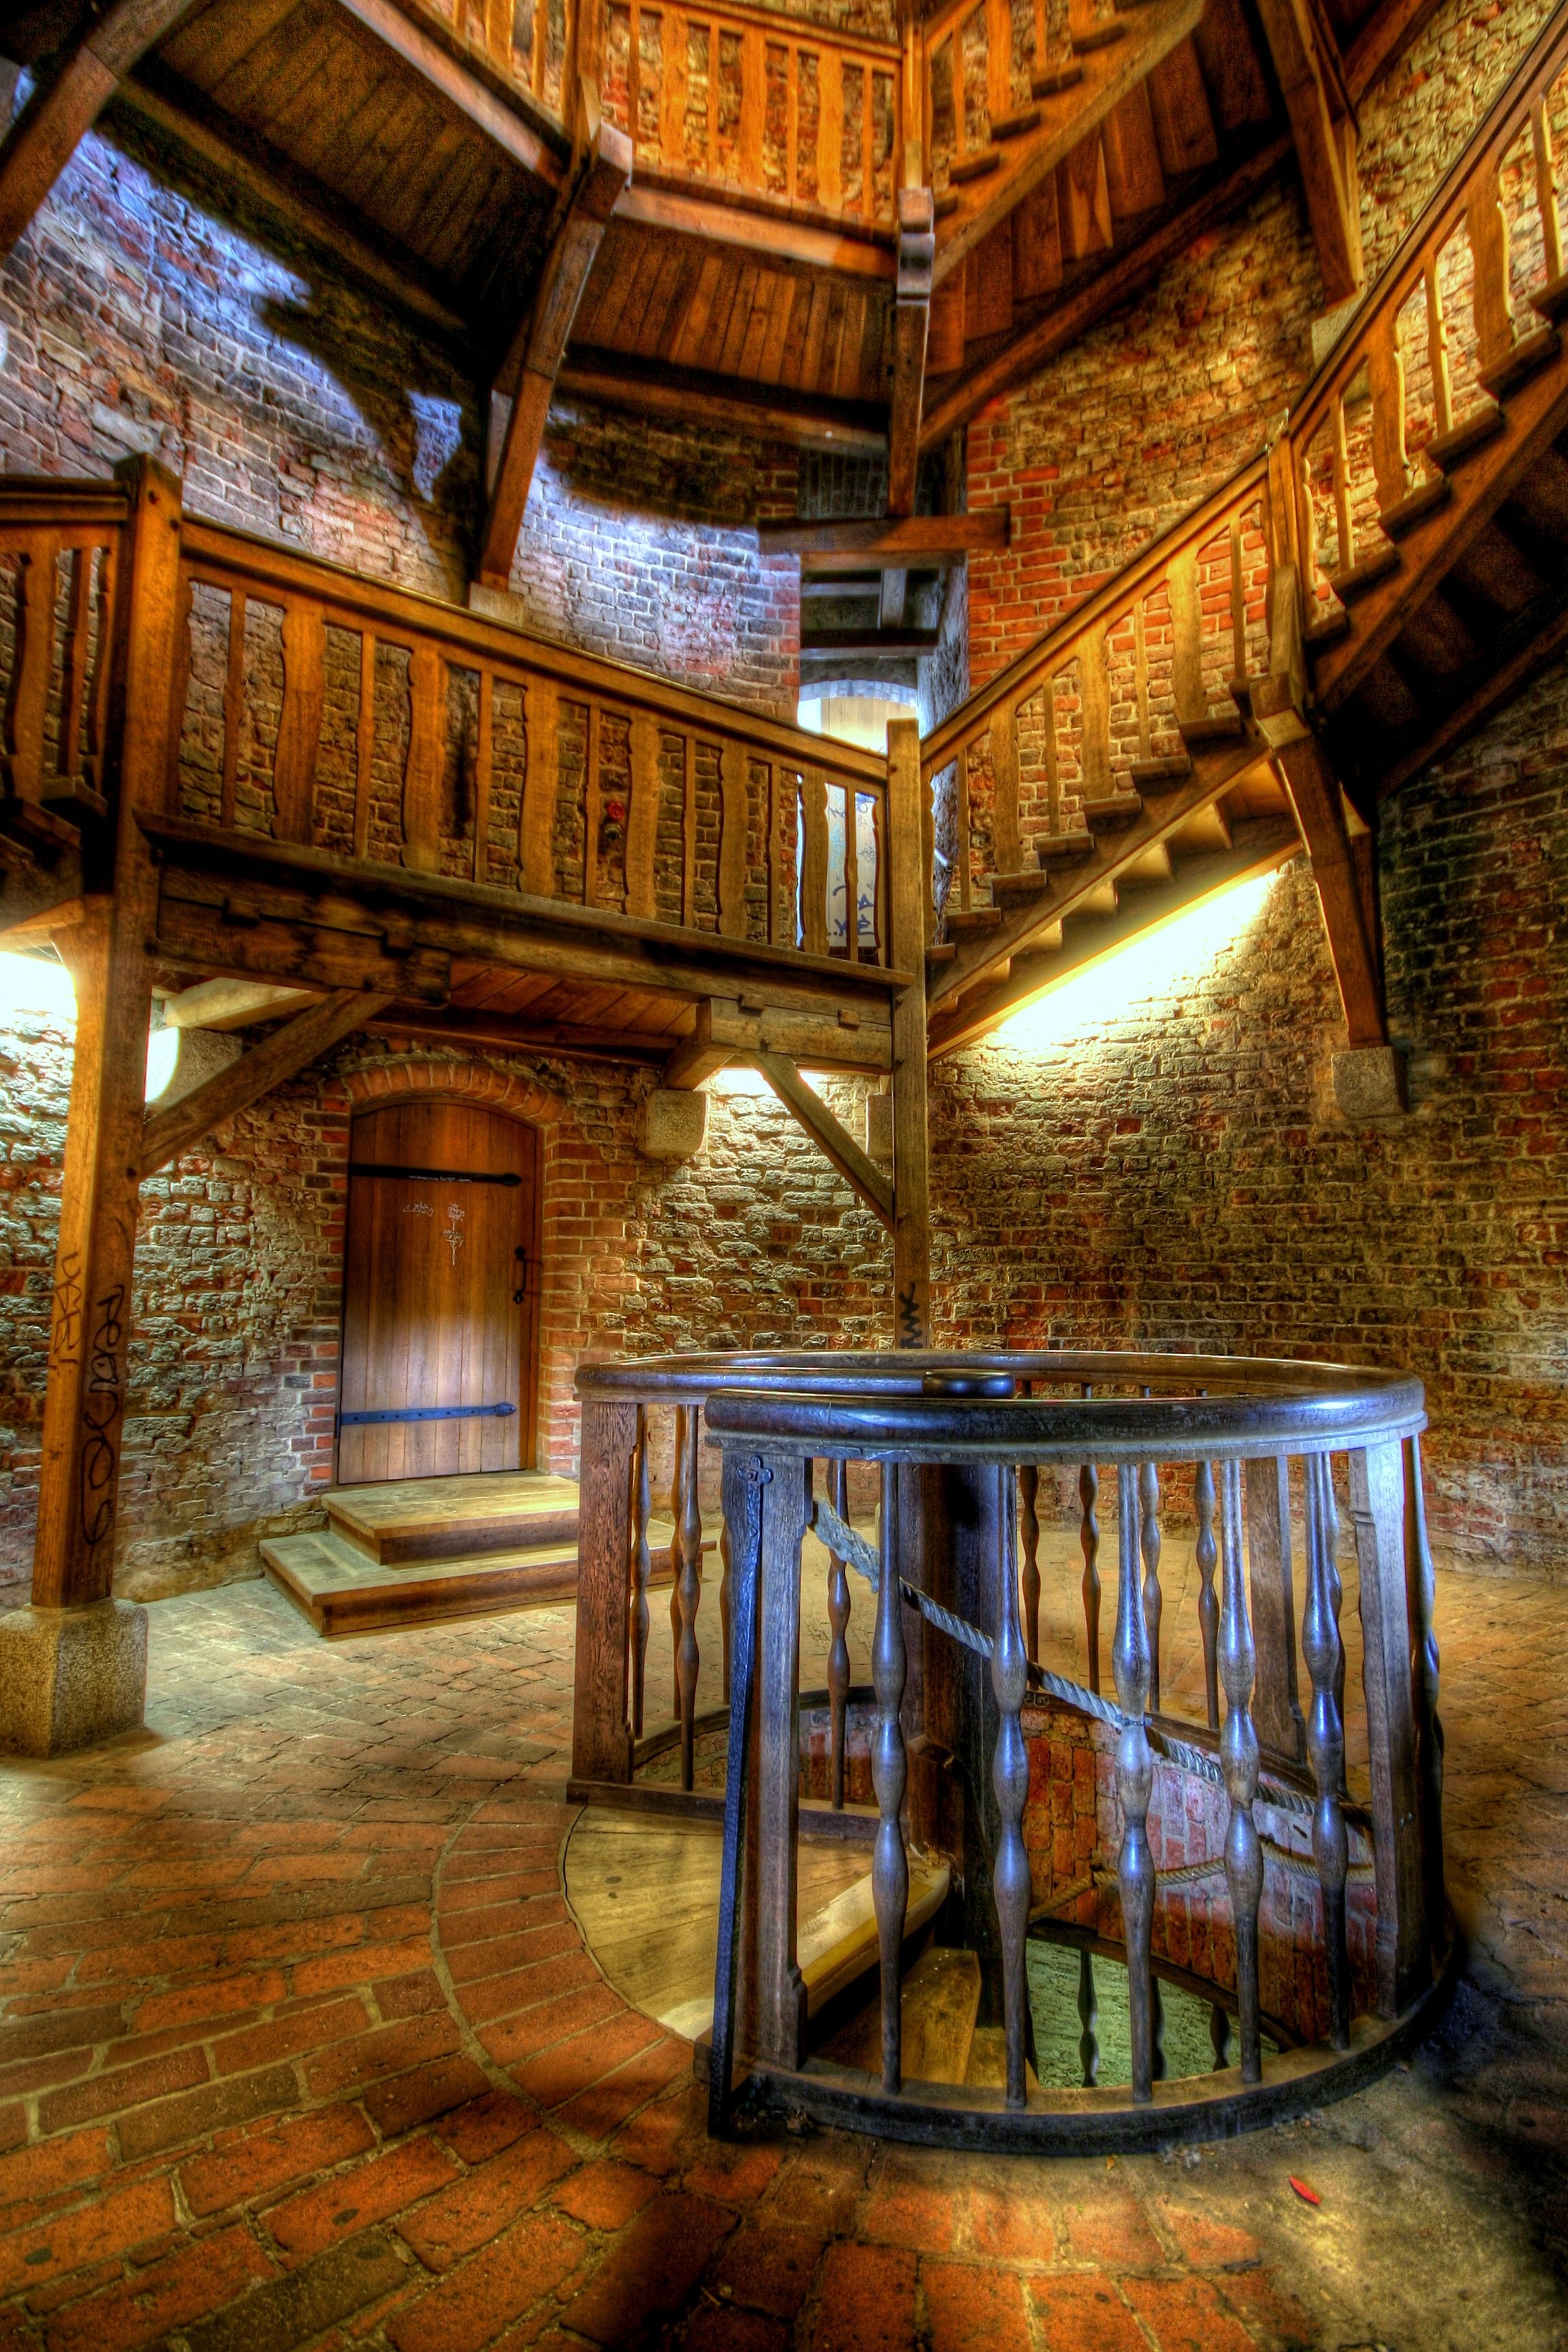 After you have taken the spiral staircase, you reach the first floor of the Juliusturm. Here begins a new, larger spiral staircase along the walls of the tower. Look at other photos taken at the same location in my set one hour in a tower See where the photo was taken at maps.yuan.cc/.